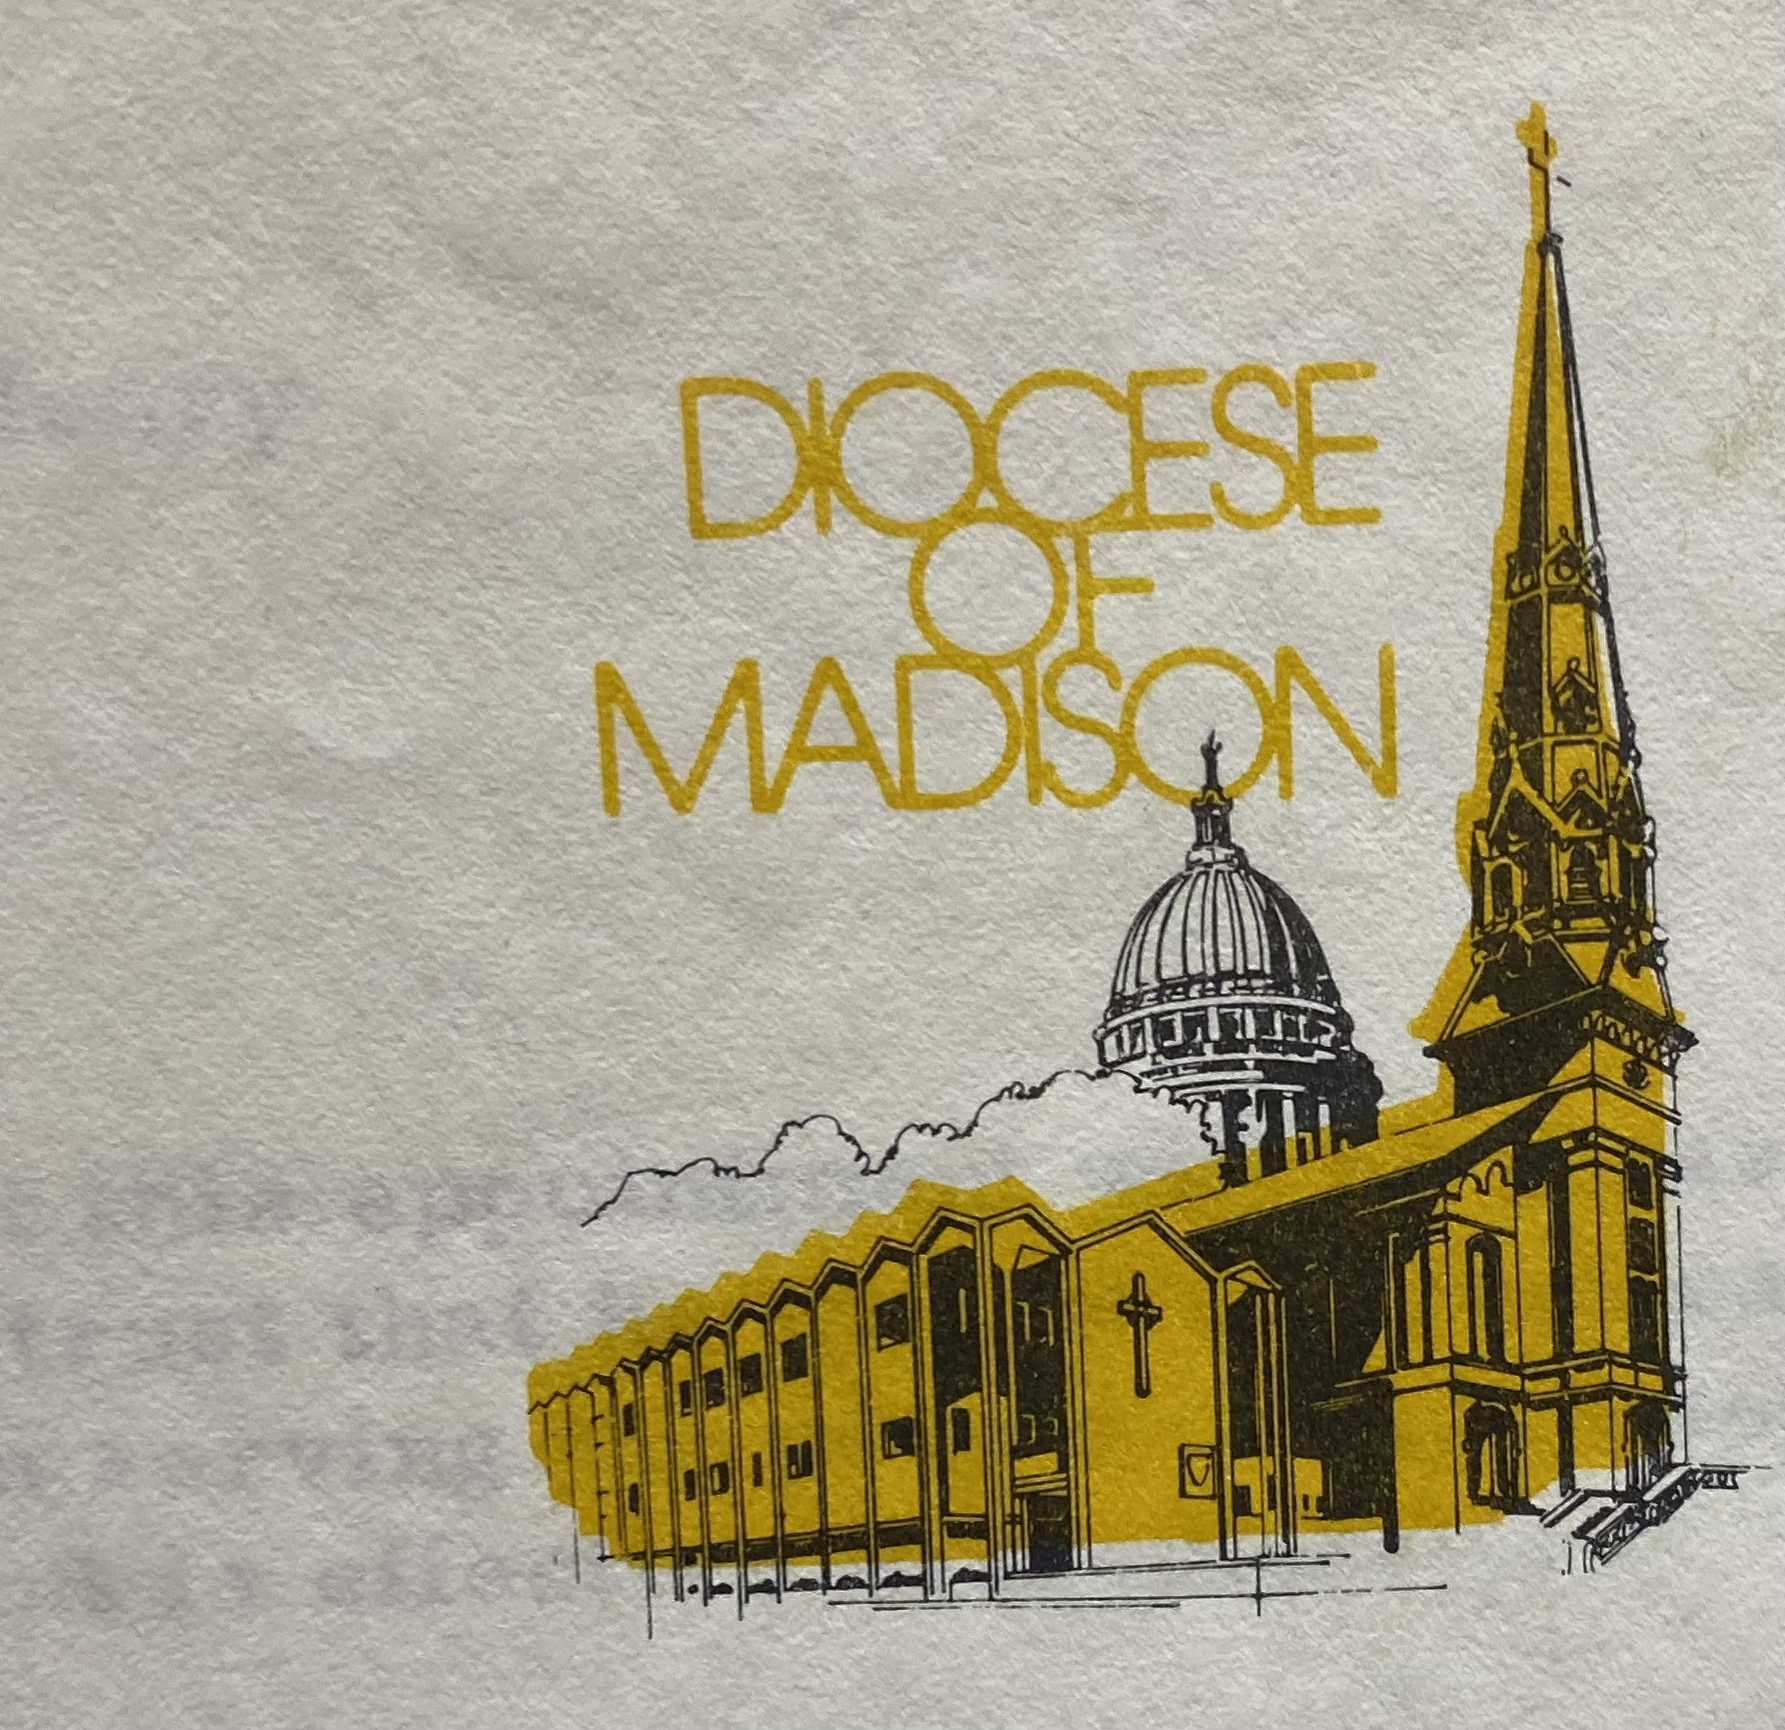 Diocese of Madison